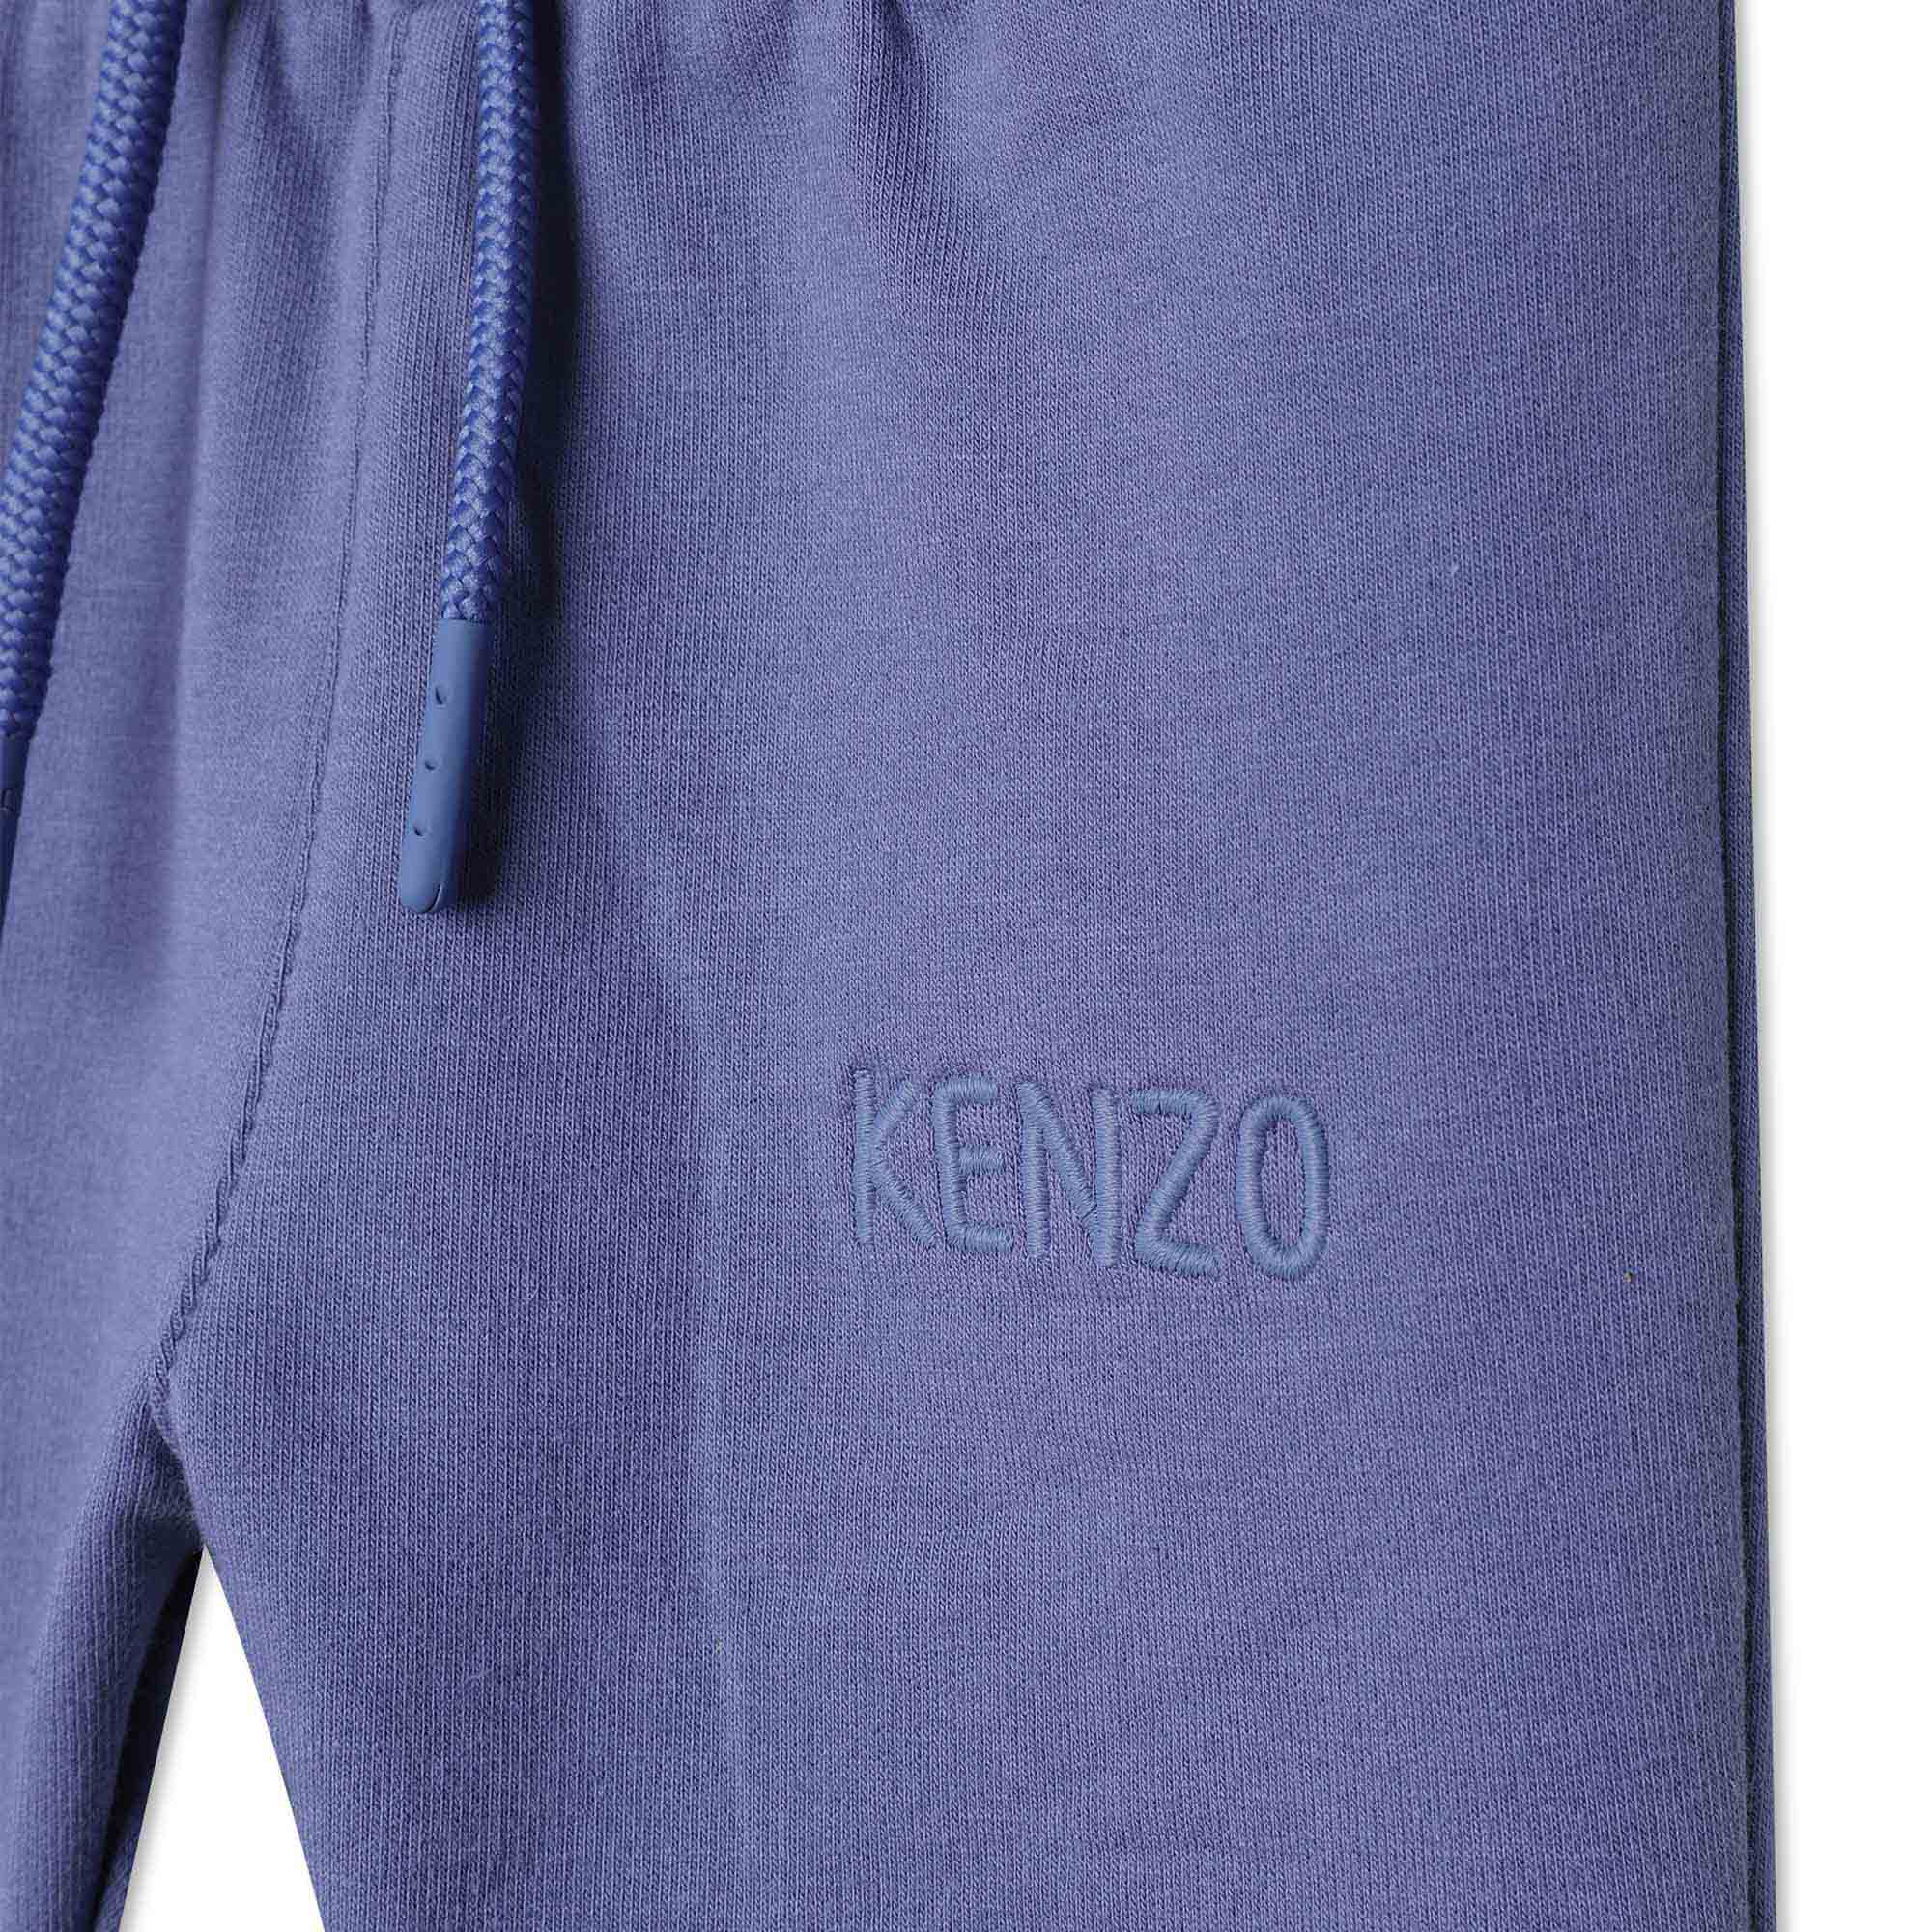 T-shirt + trousers outfit KENZO KIDS for BOY